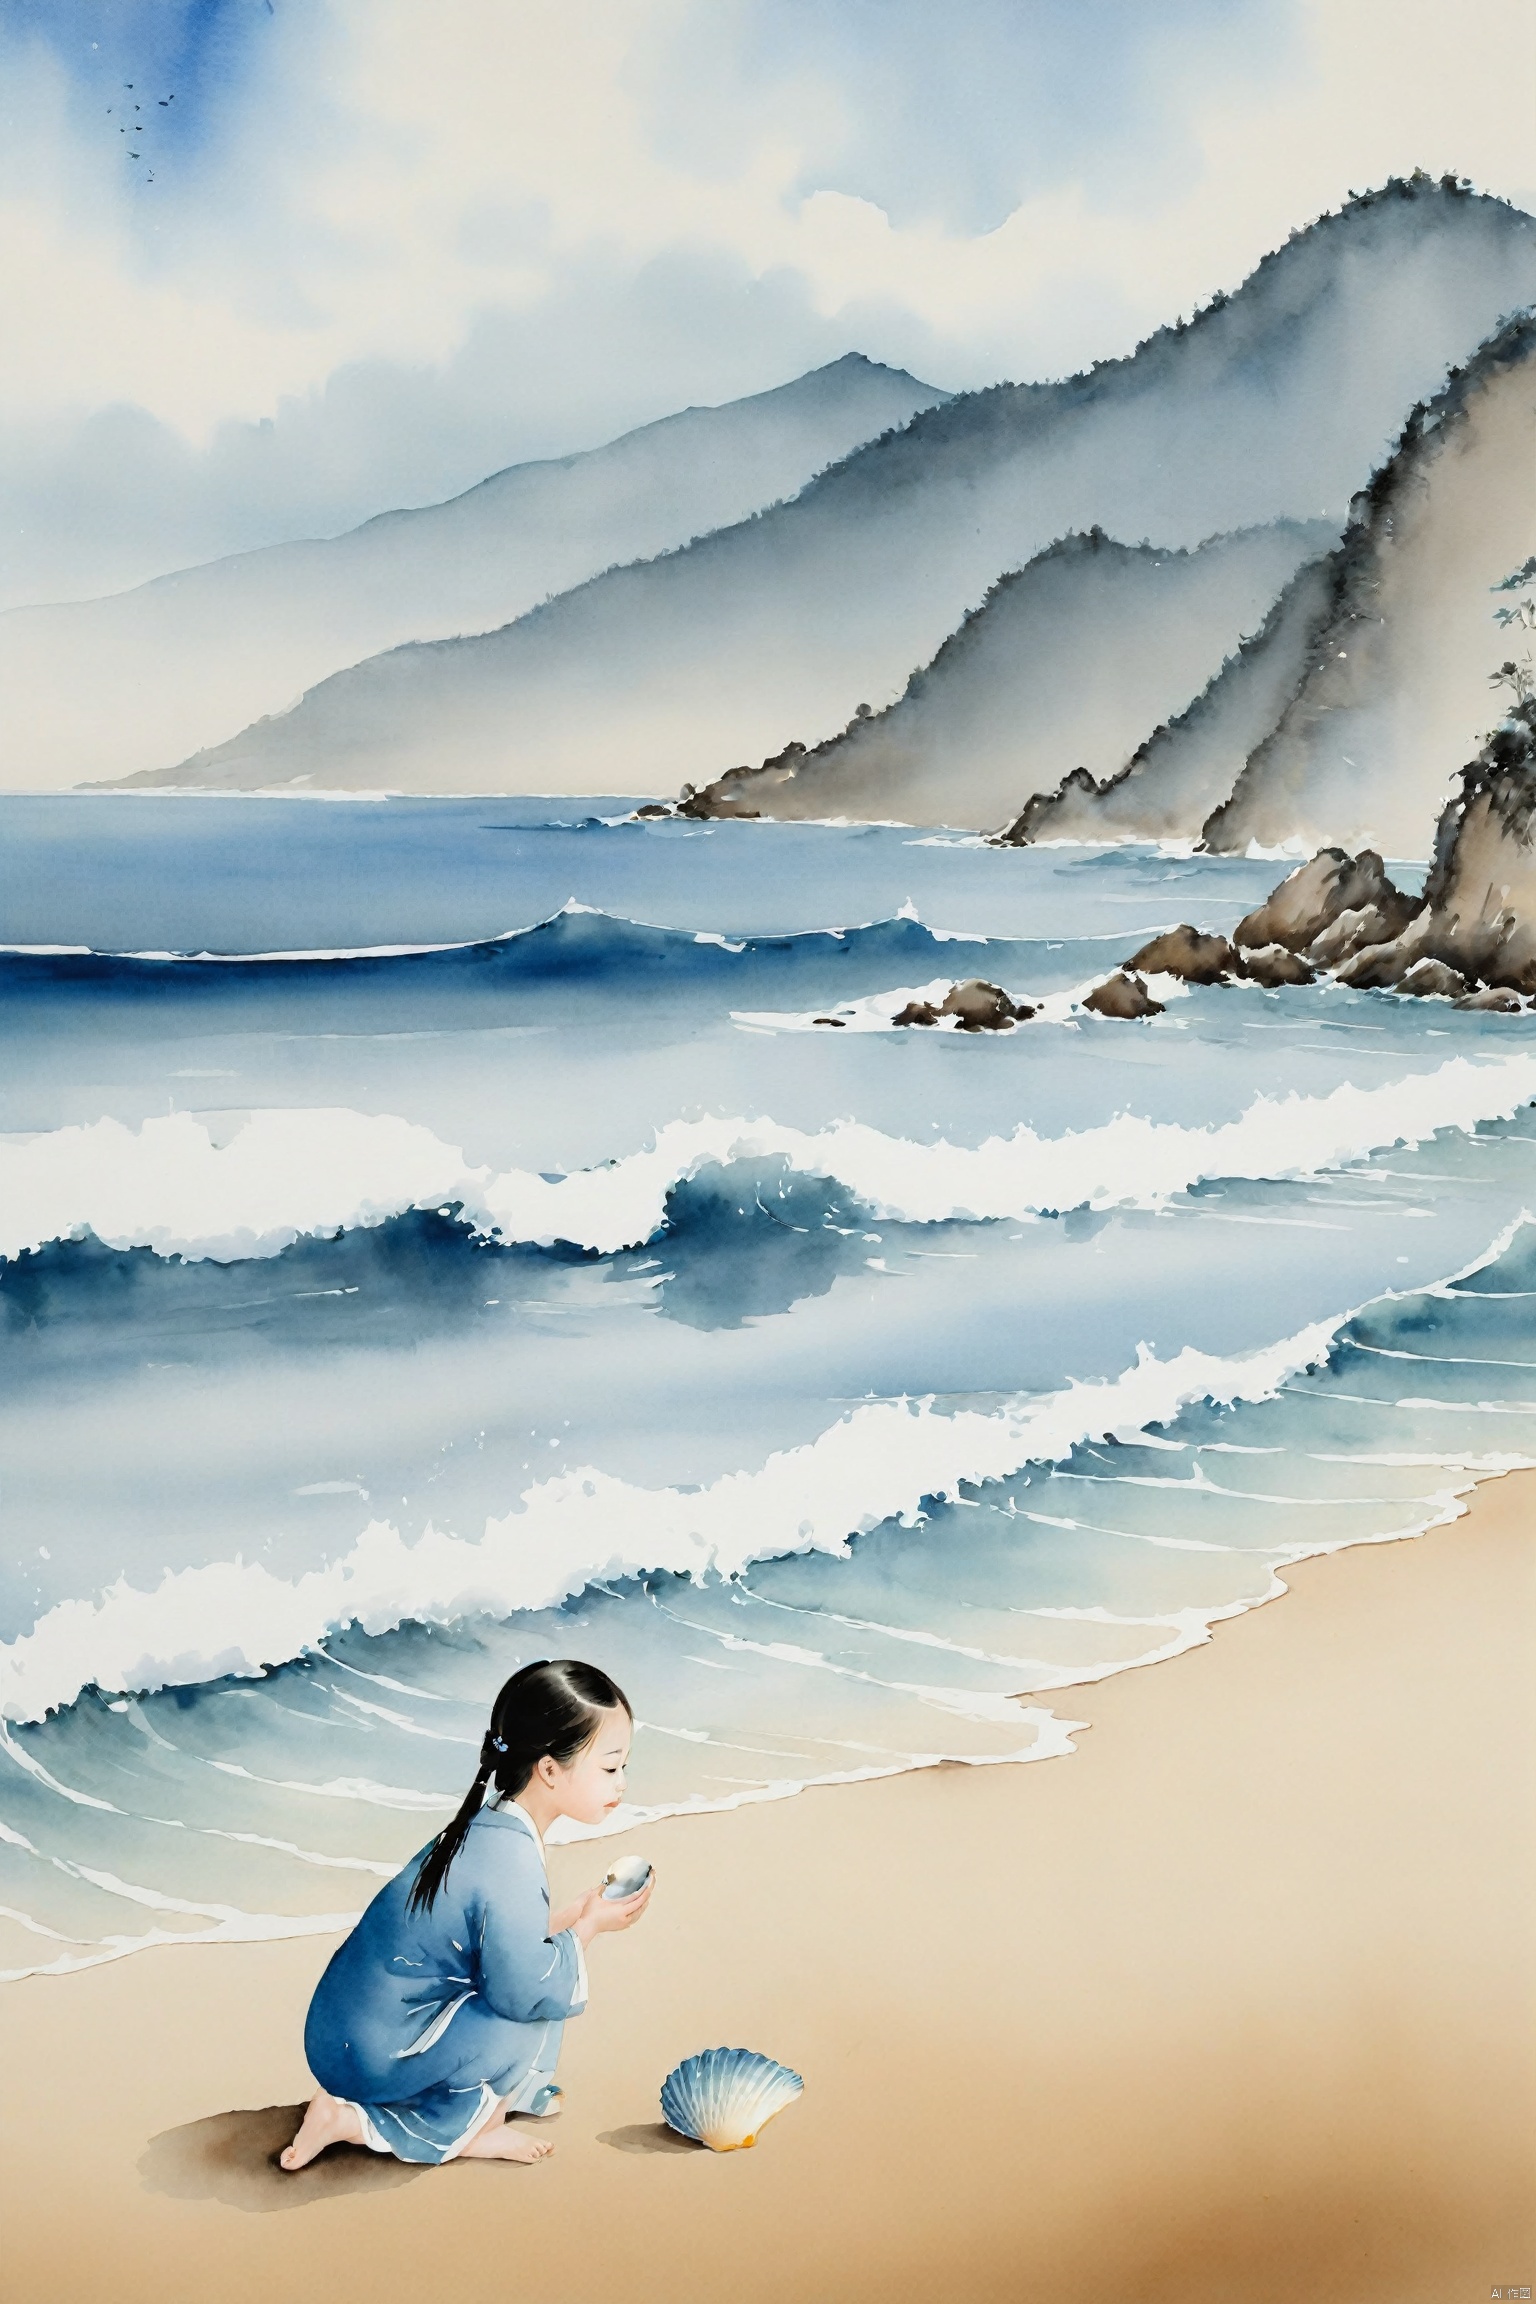  traditional chinese ink painting,A little lovely girl on the beach by the sea, holds a seashell in her hand, intently listening to the sound of the waves. Behind her is a vast expanse of blue ocean, with waves gently lapping the shore, creating a harmonious scene with the girl's tranquility.